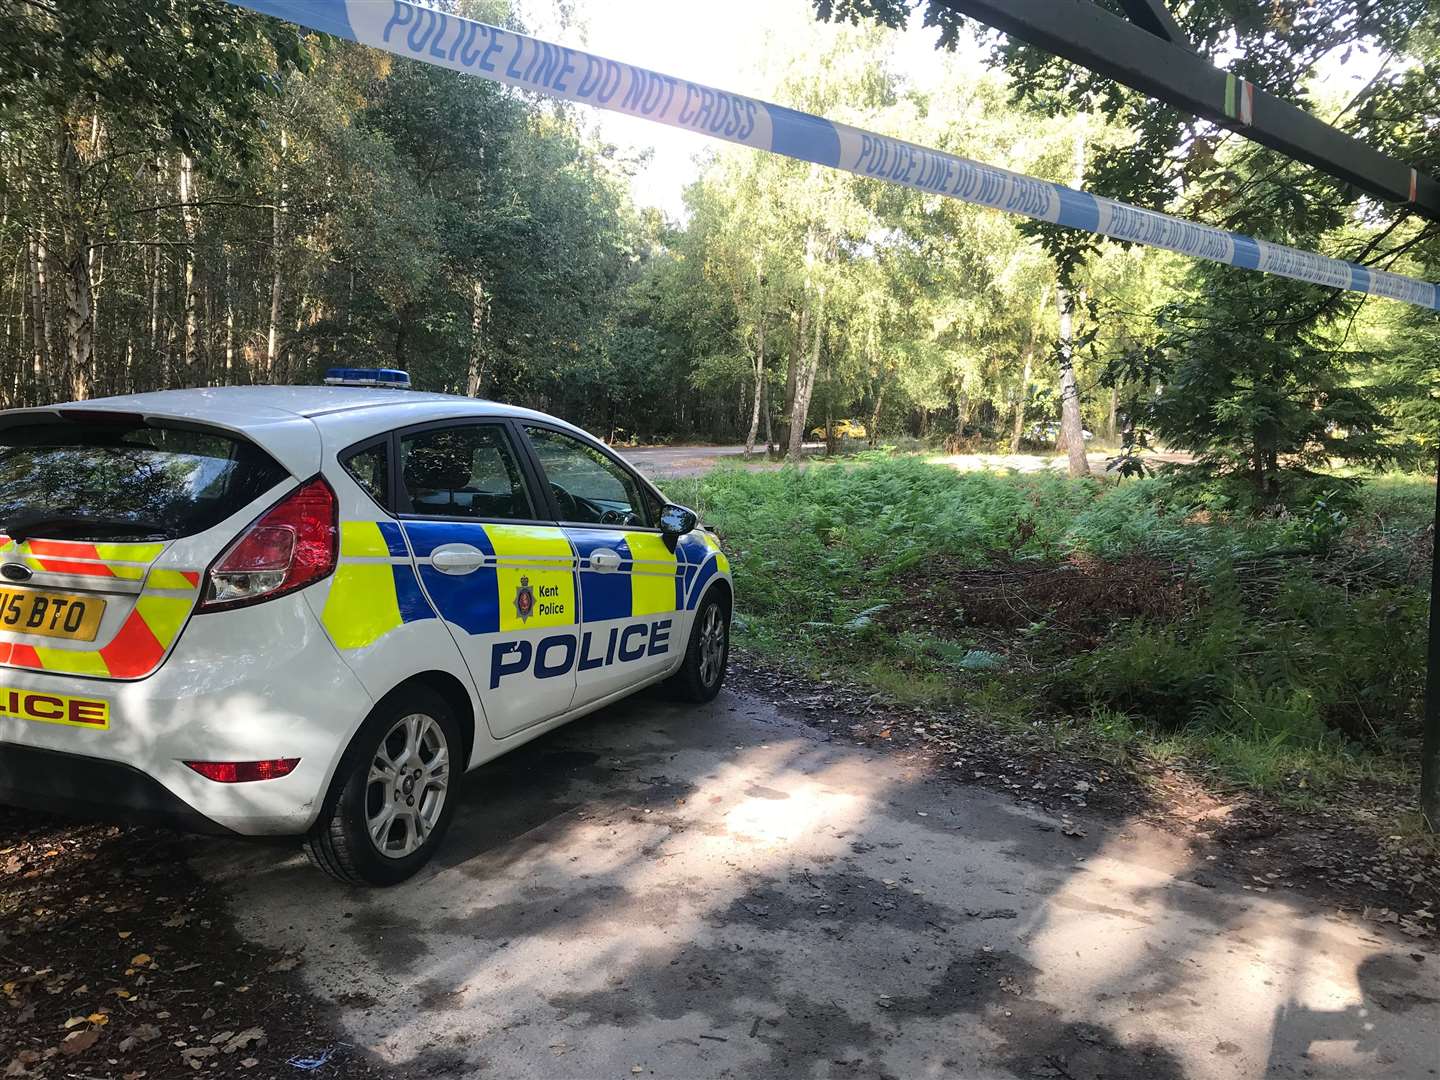 Police cordoned off Clowes Wood on September 27